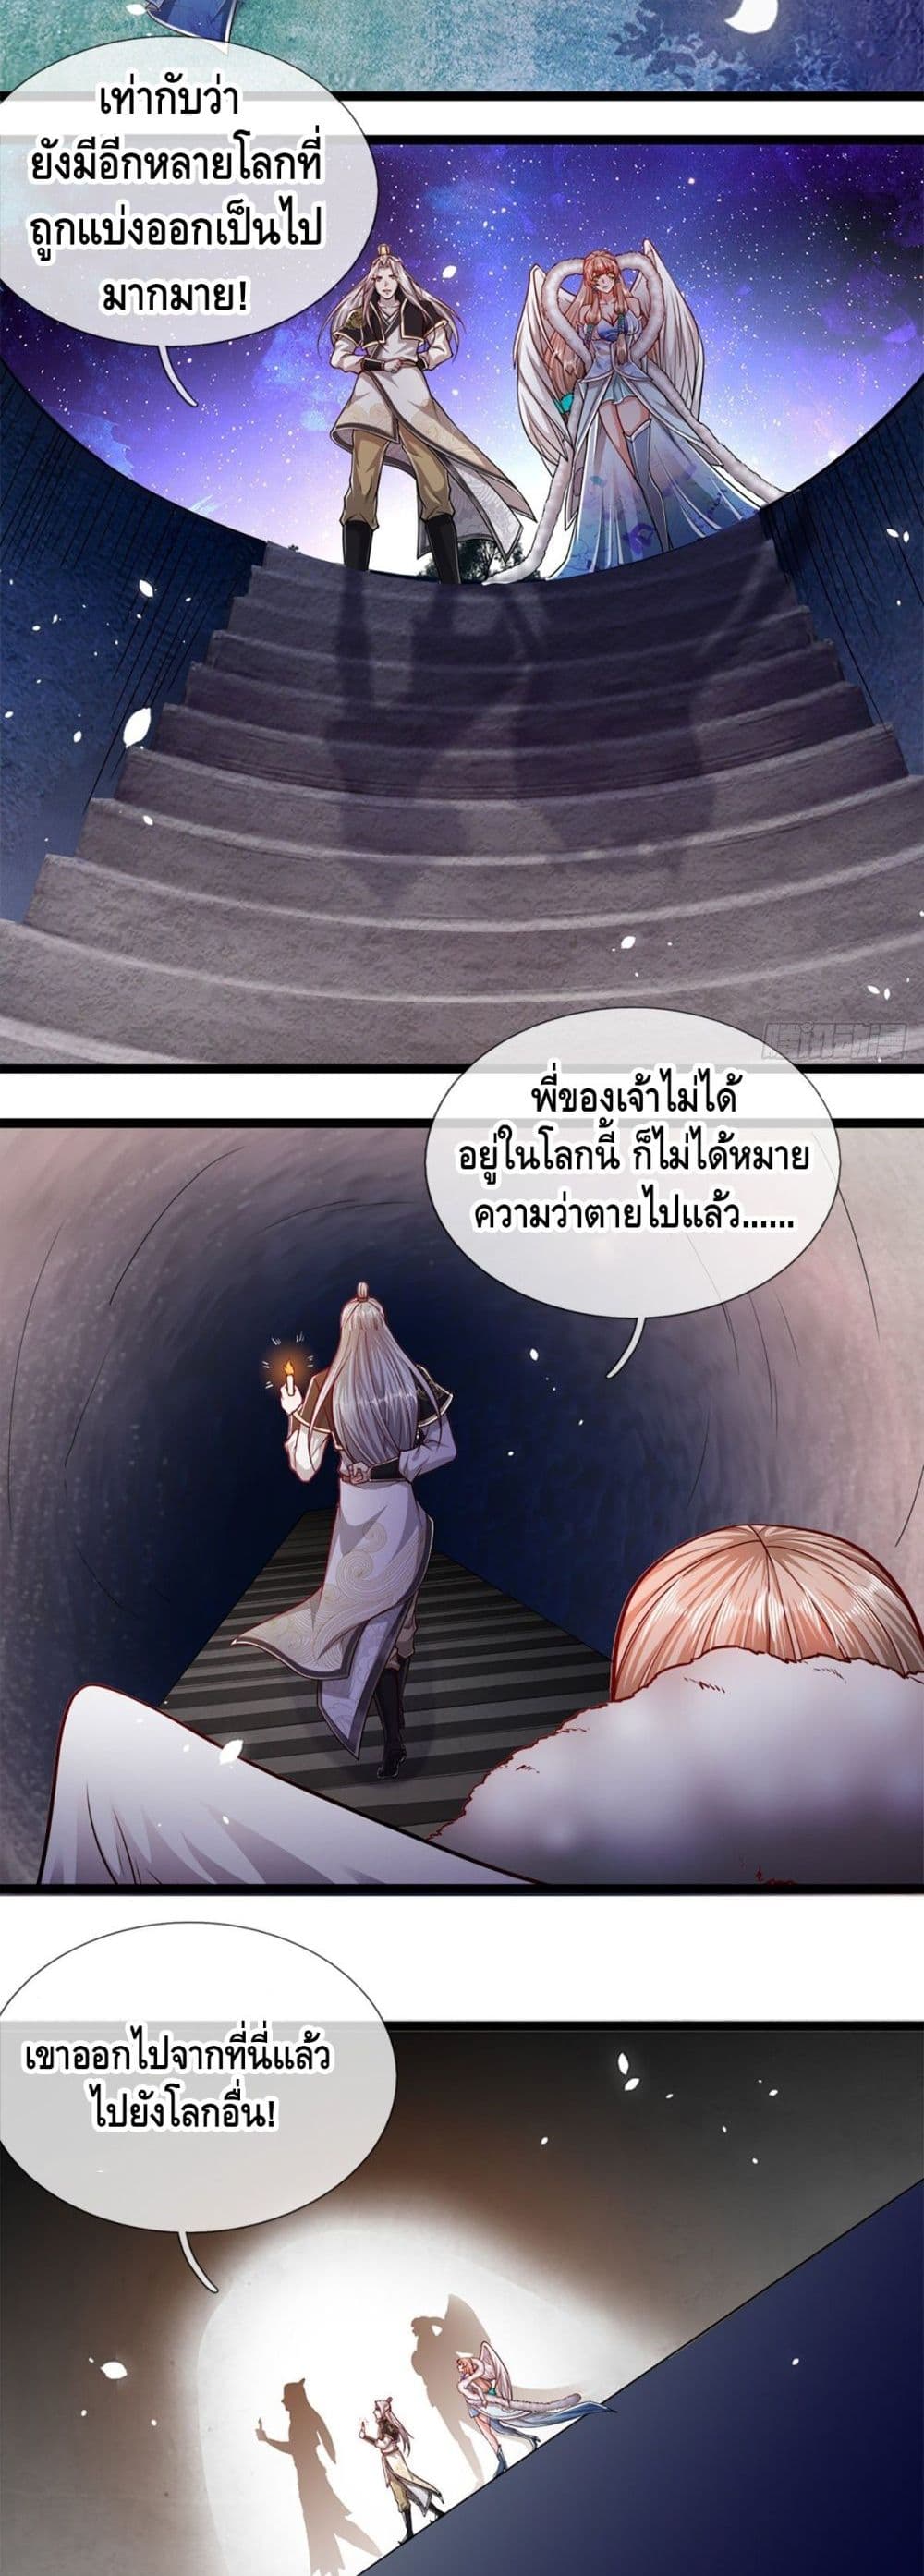 Disciples All Over the World à¸à¸­à¸à¸à¸µà¹ 63 (3)